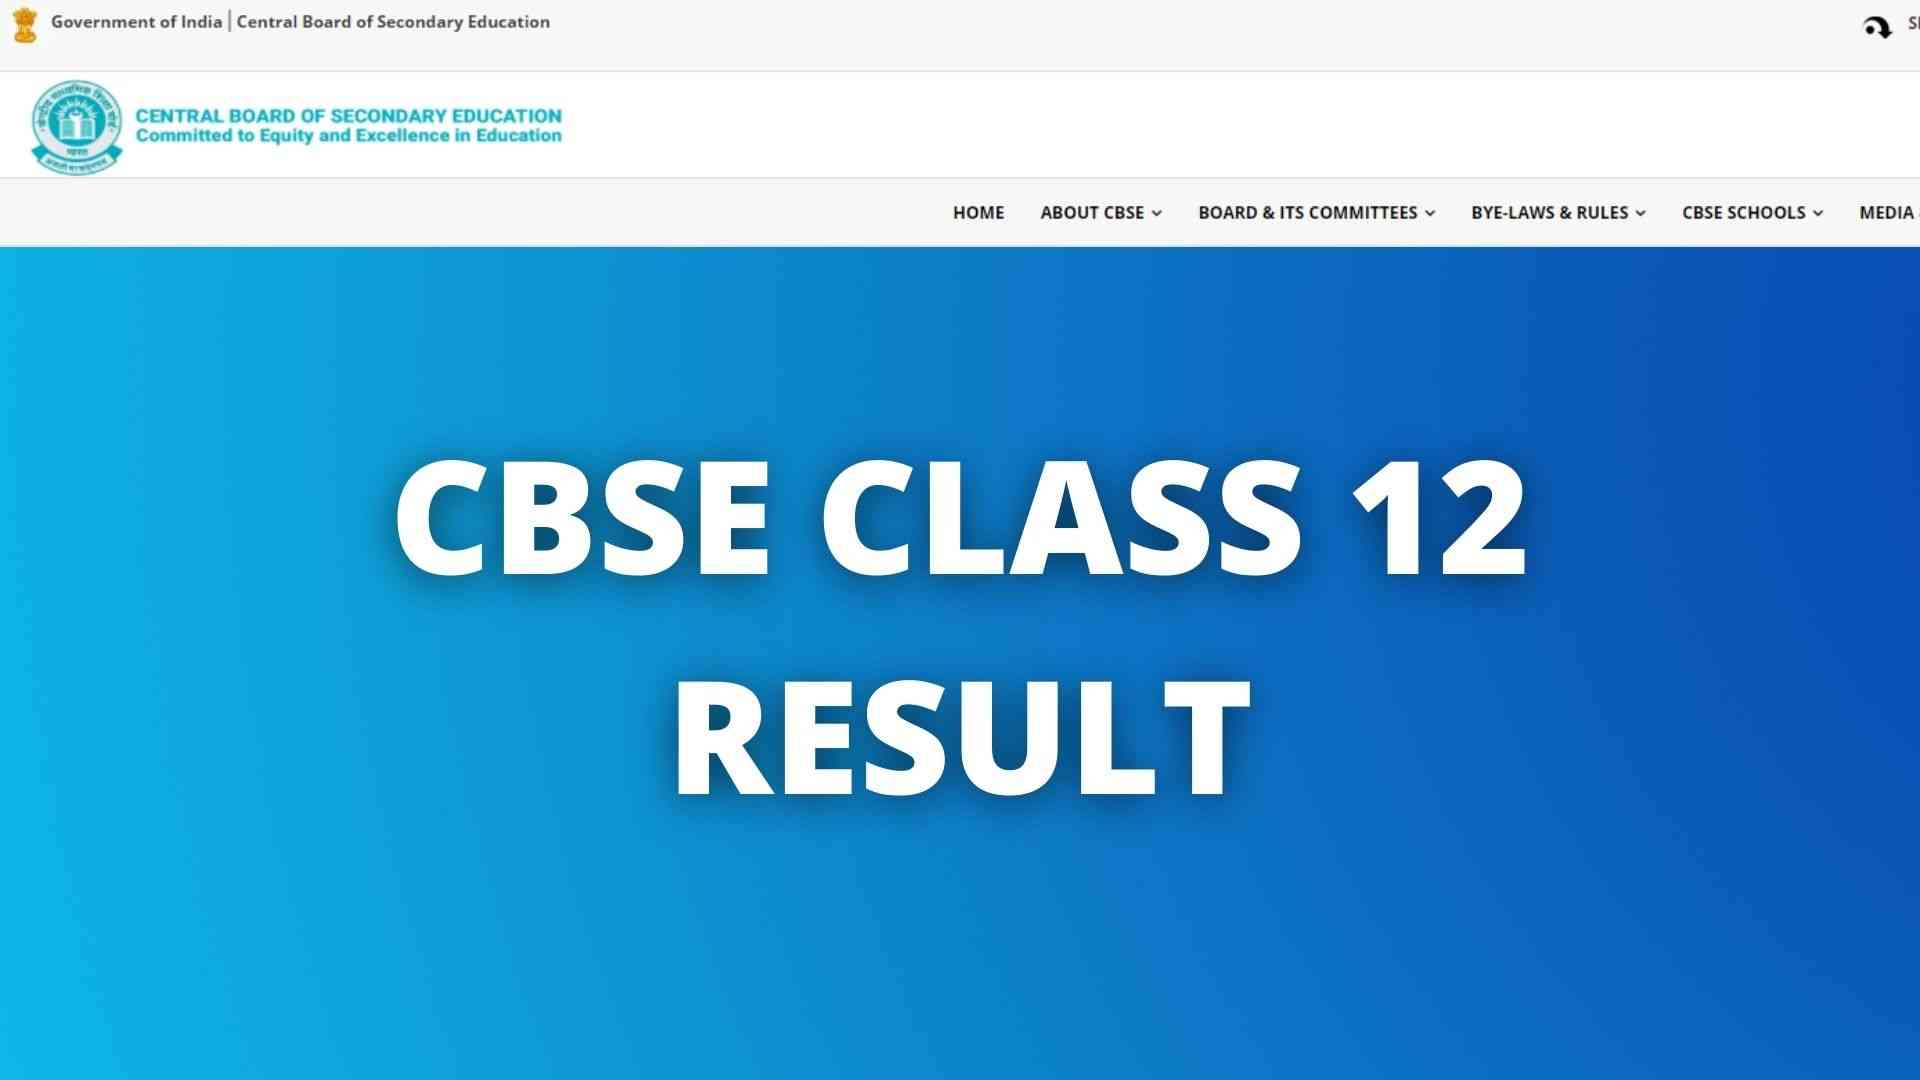 visit the official website at cbseresults.nic.in